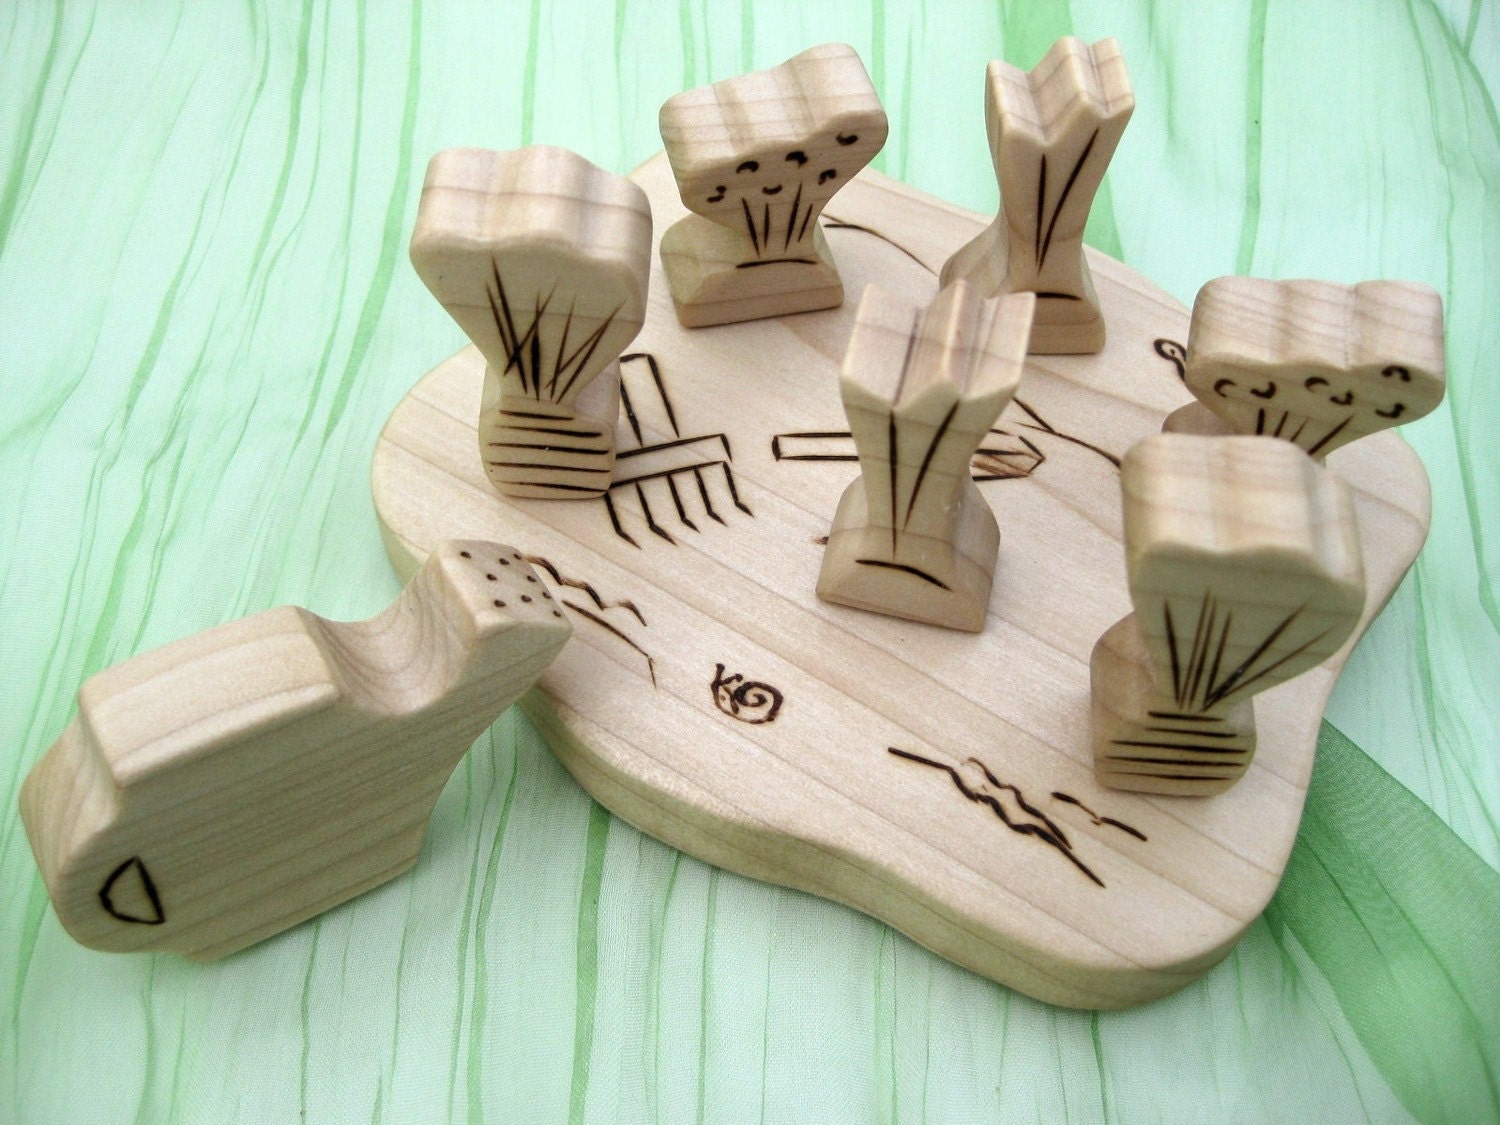 Gardening Play Set - Handmade Wooden Toy --- Made to Order